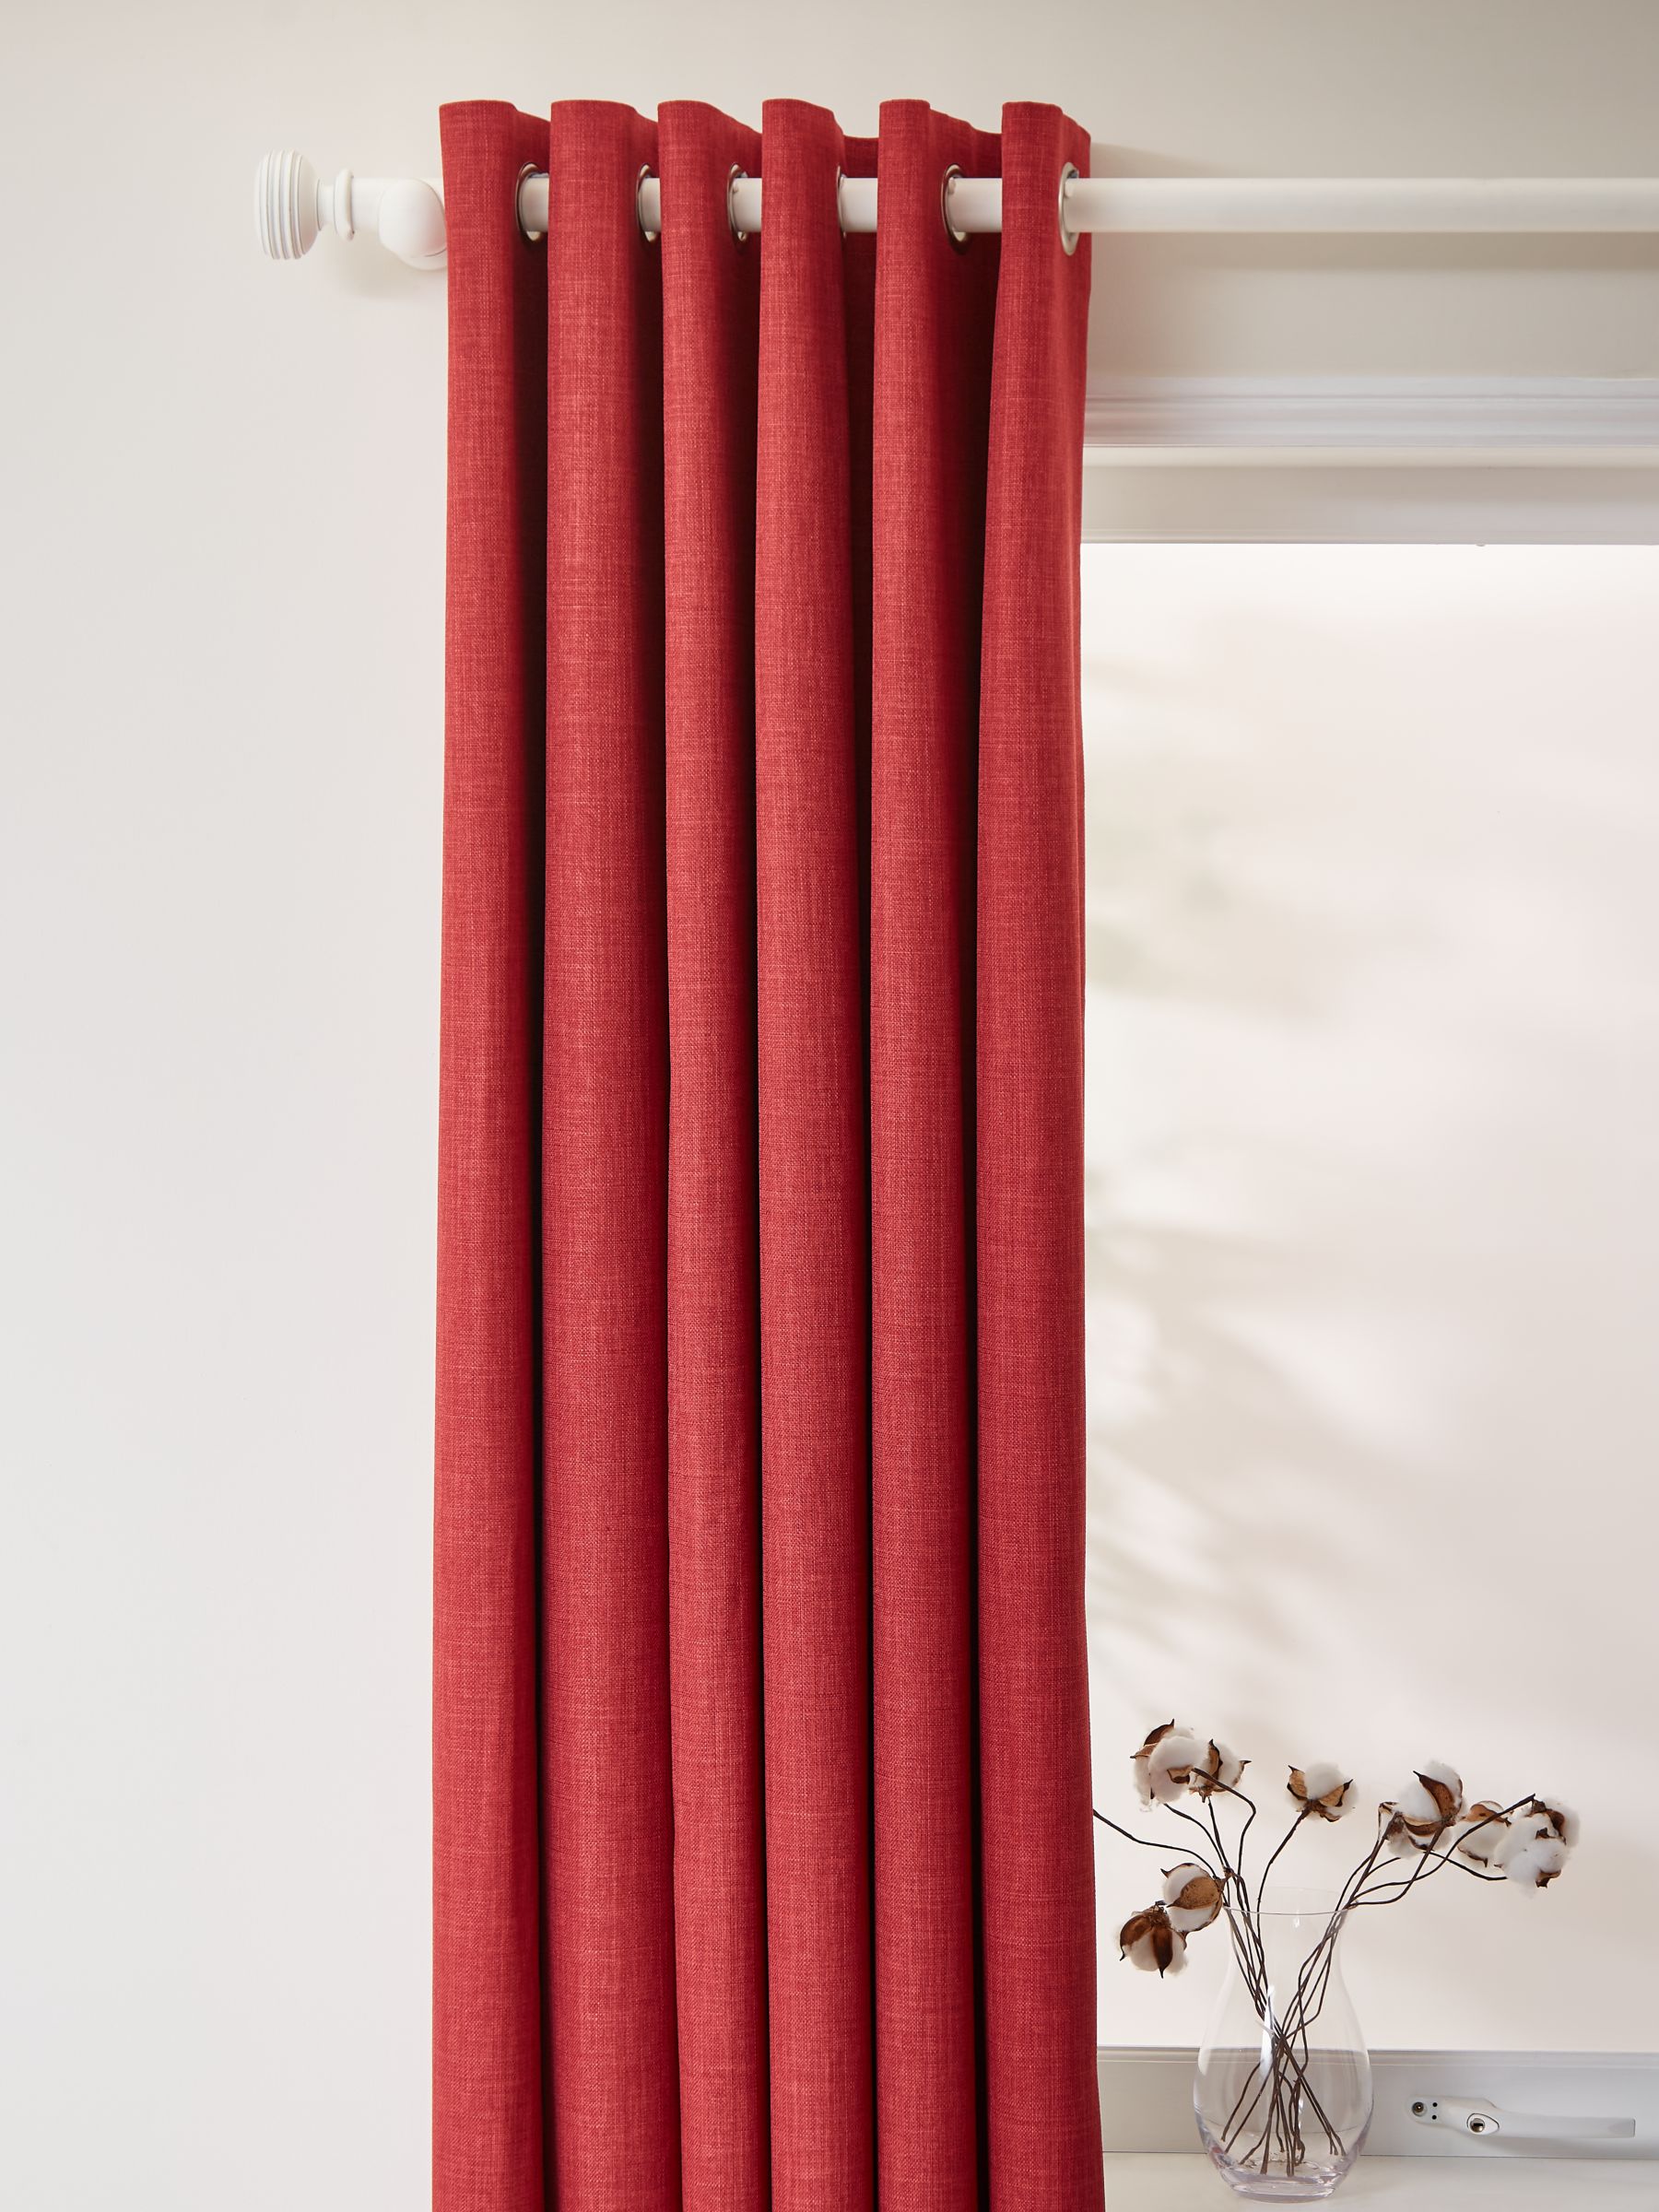 JOHN LEWIS COTTON RIB CHERRY RED EYELET LINED CURTAINS 228cm WIDE  X 137cm DROP 